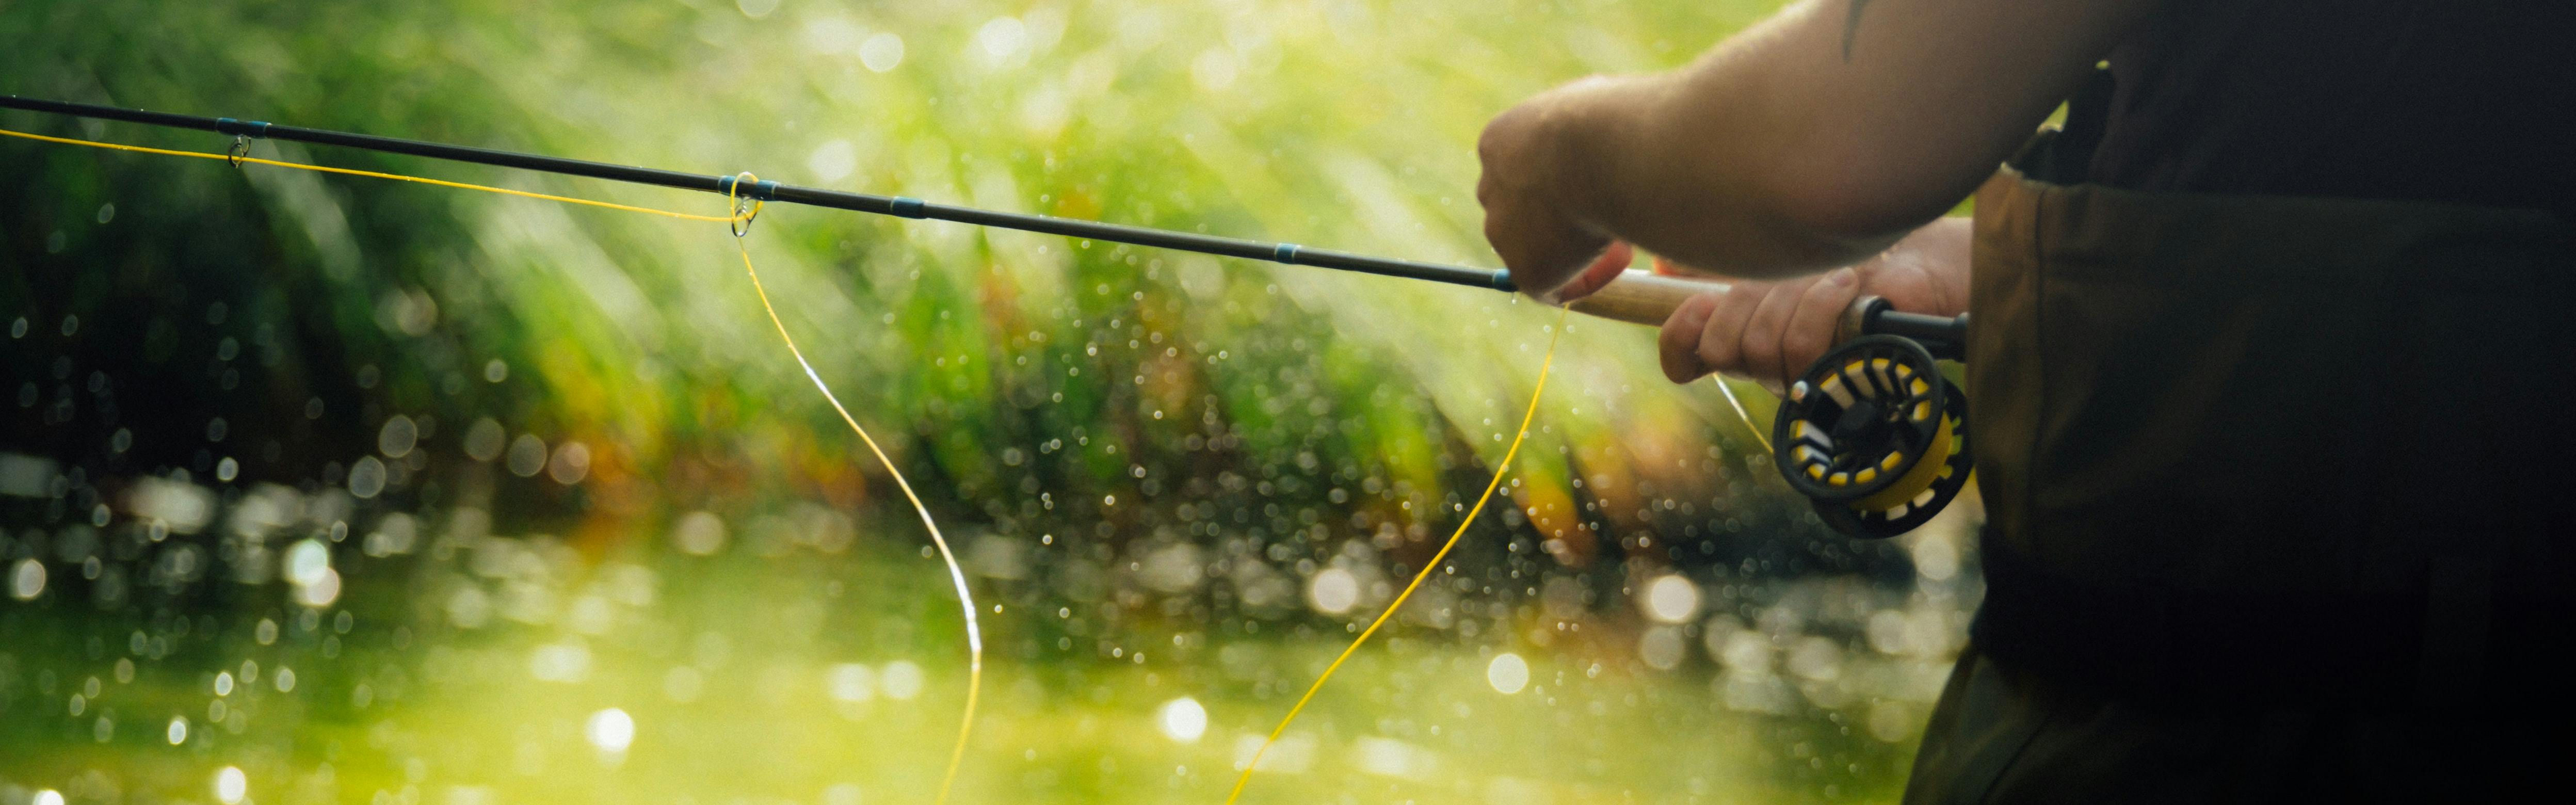 Braided Line for Backing – How to save some money on your fly fishing setup.  » Outdoors International